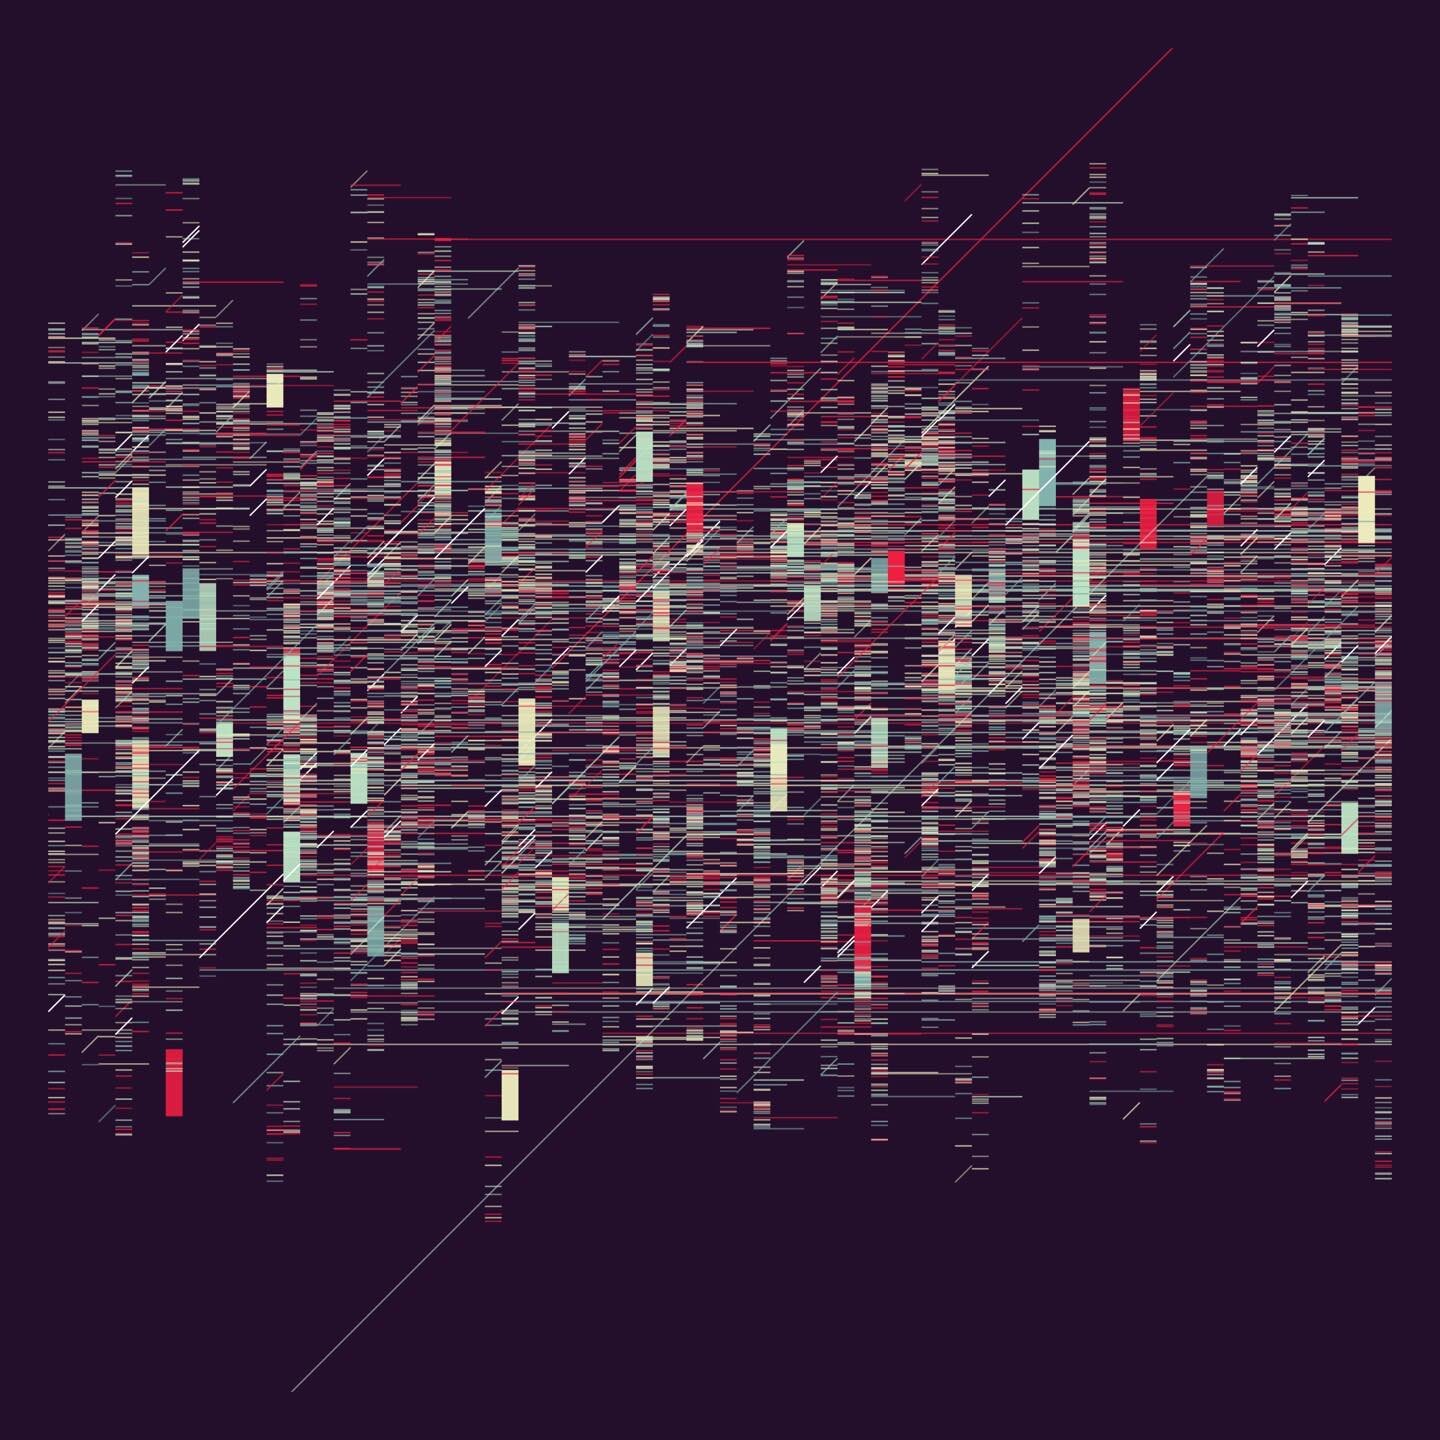 #p5js #creativecoding @creativecodeart Variation of the &lsquo;noise()&rsquo; example from the p5.js reference, with some random() thrown in for good measure. In this case I&rsquo;m continuously adding a single line or rectangle to a column in the co